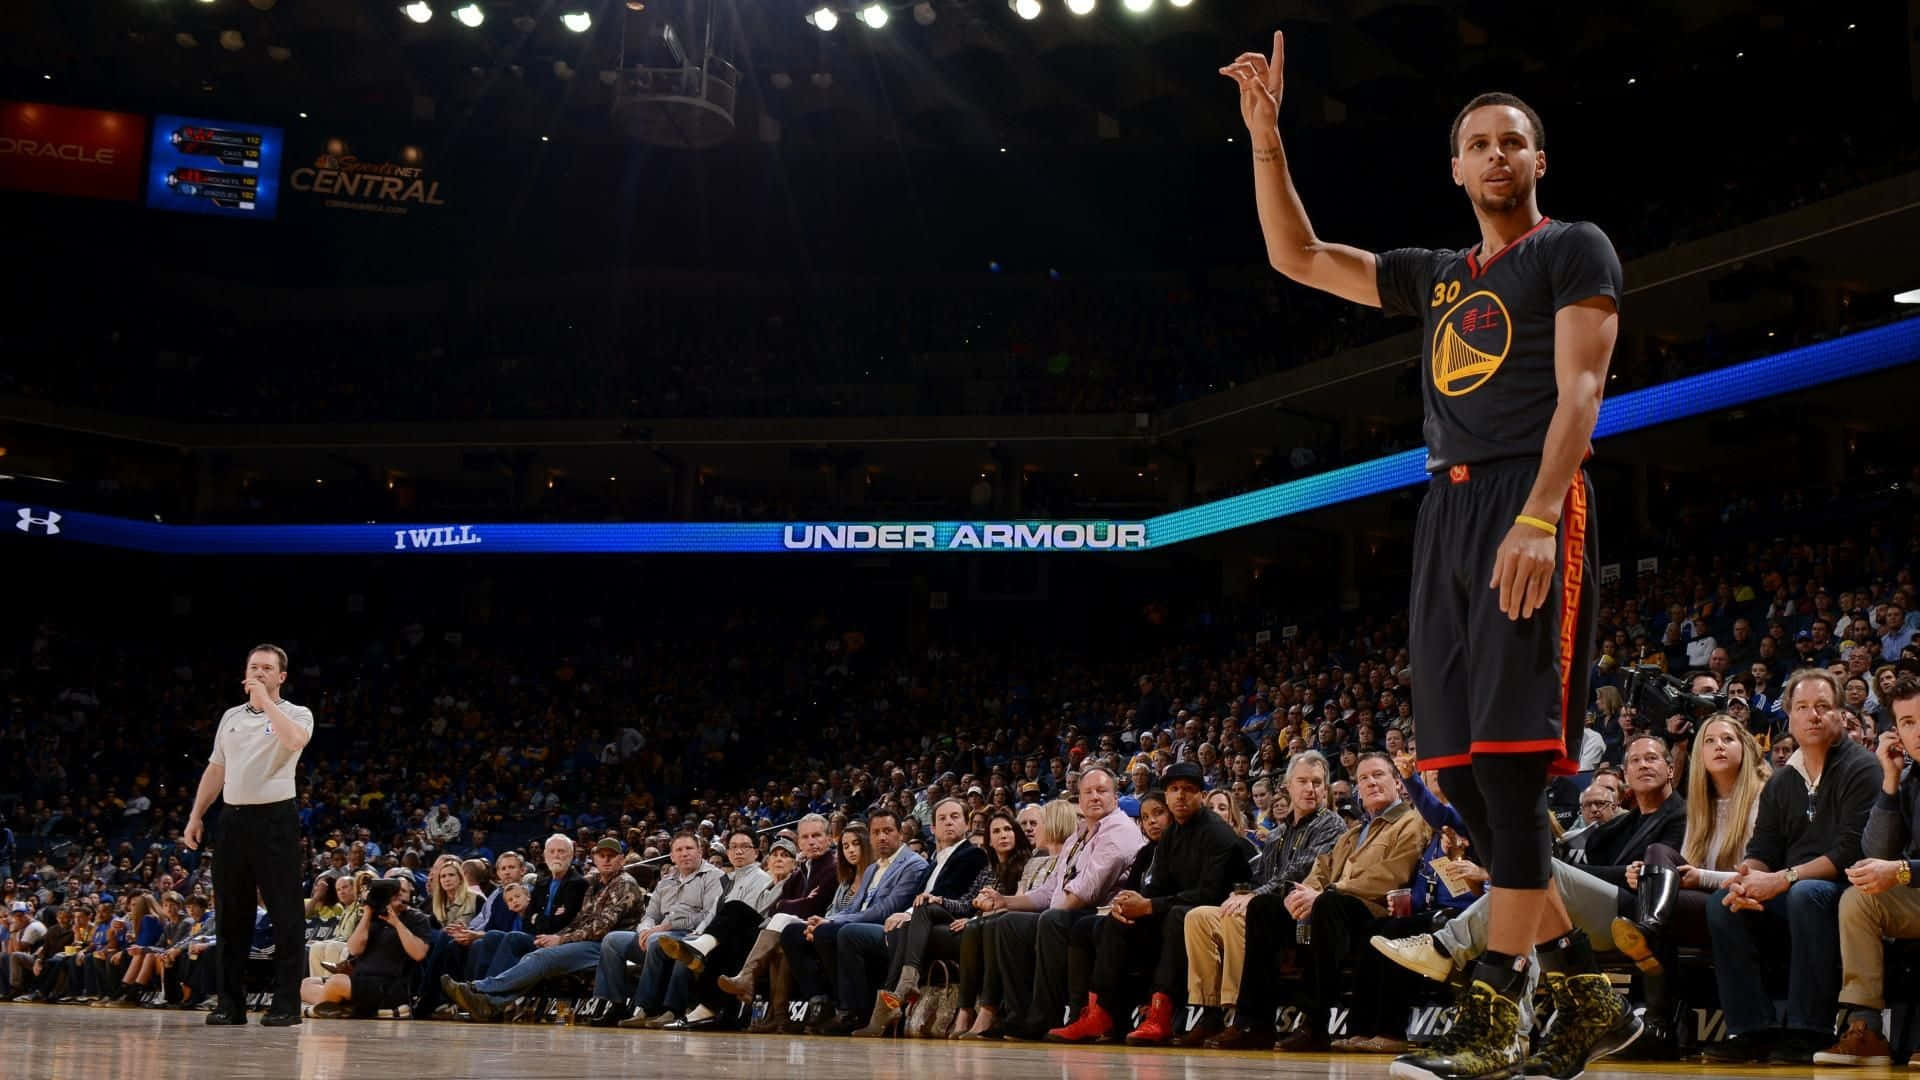 Stephen Curry in action during a basketball game